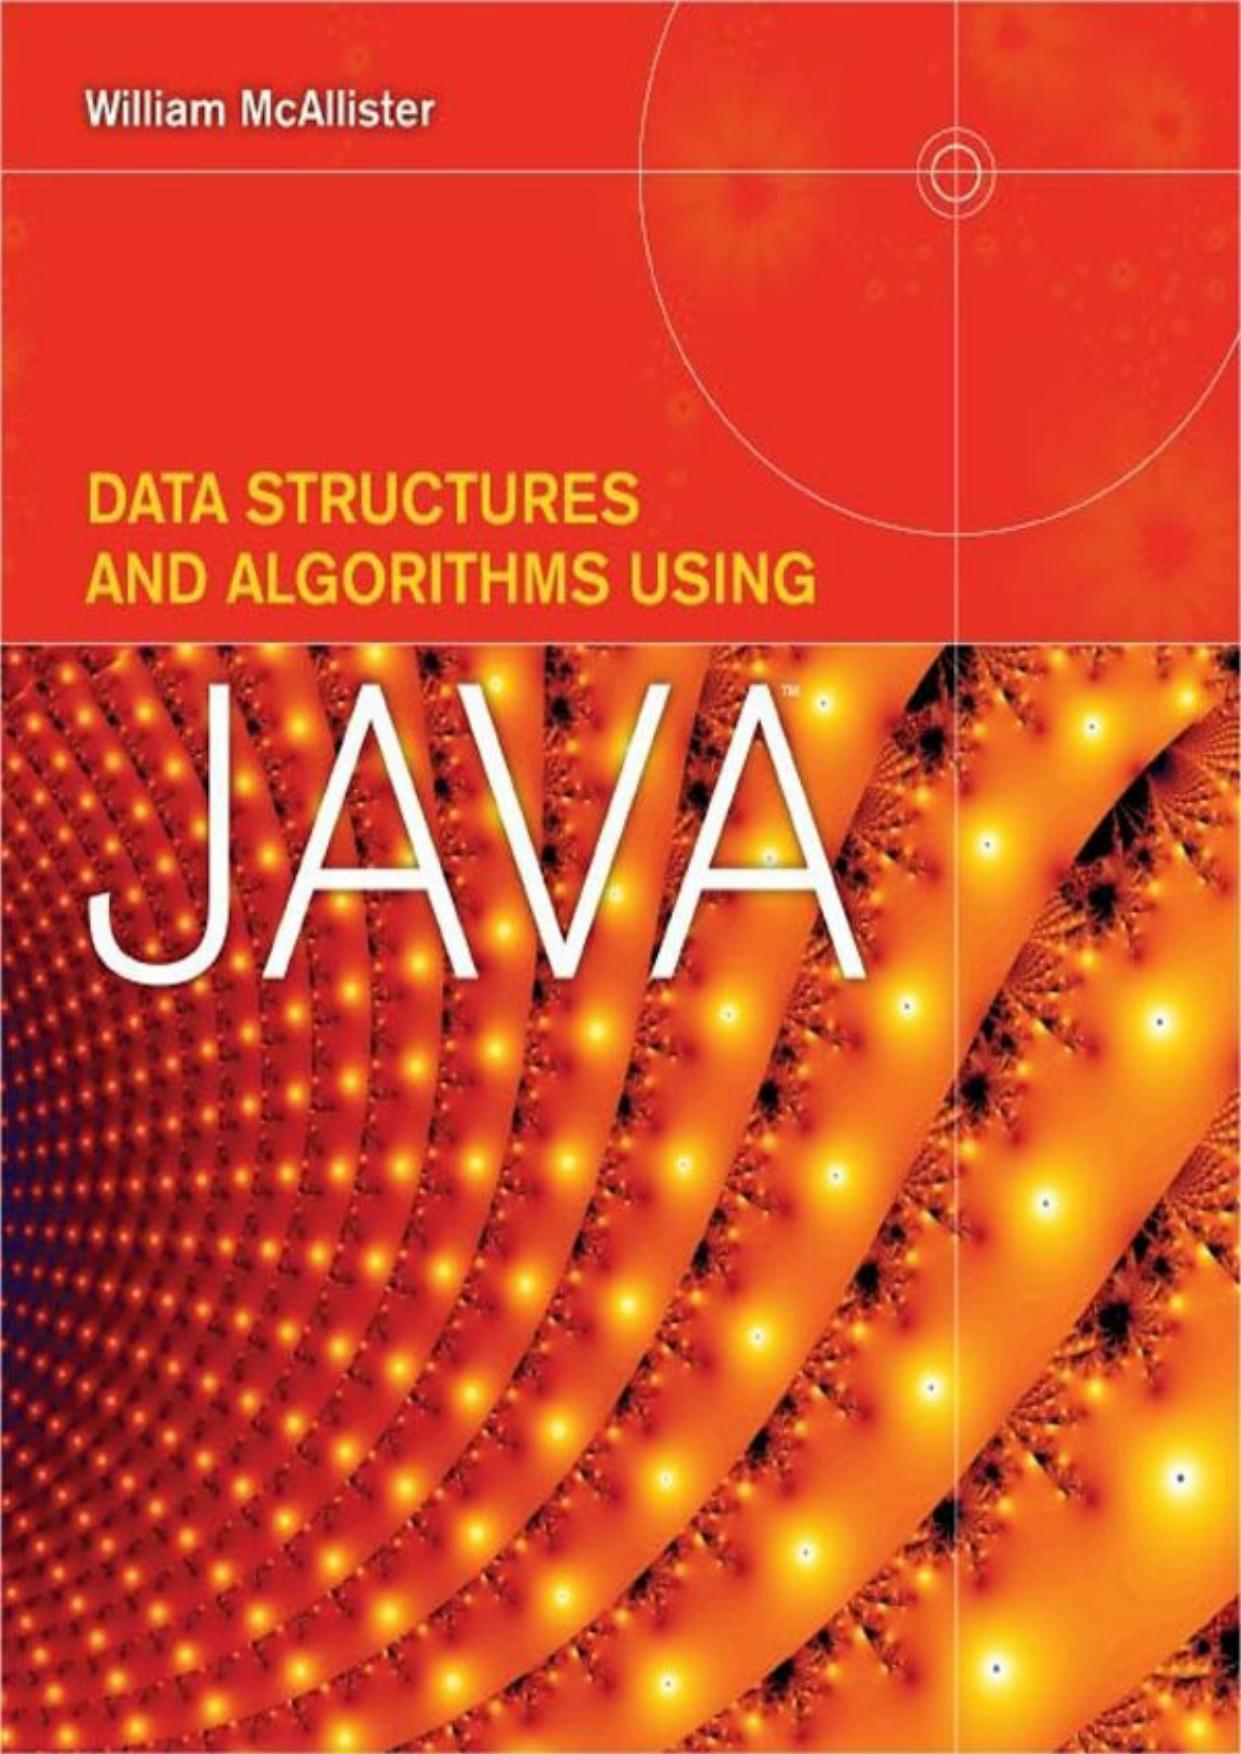 Data Structures and Algorithms Using Java by William McAllister